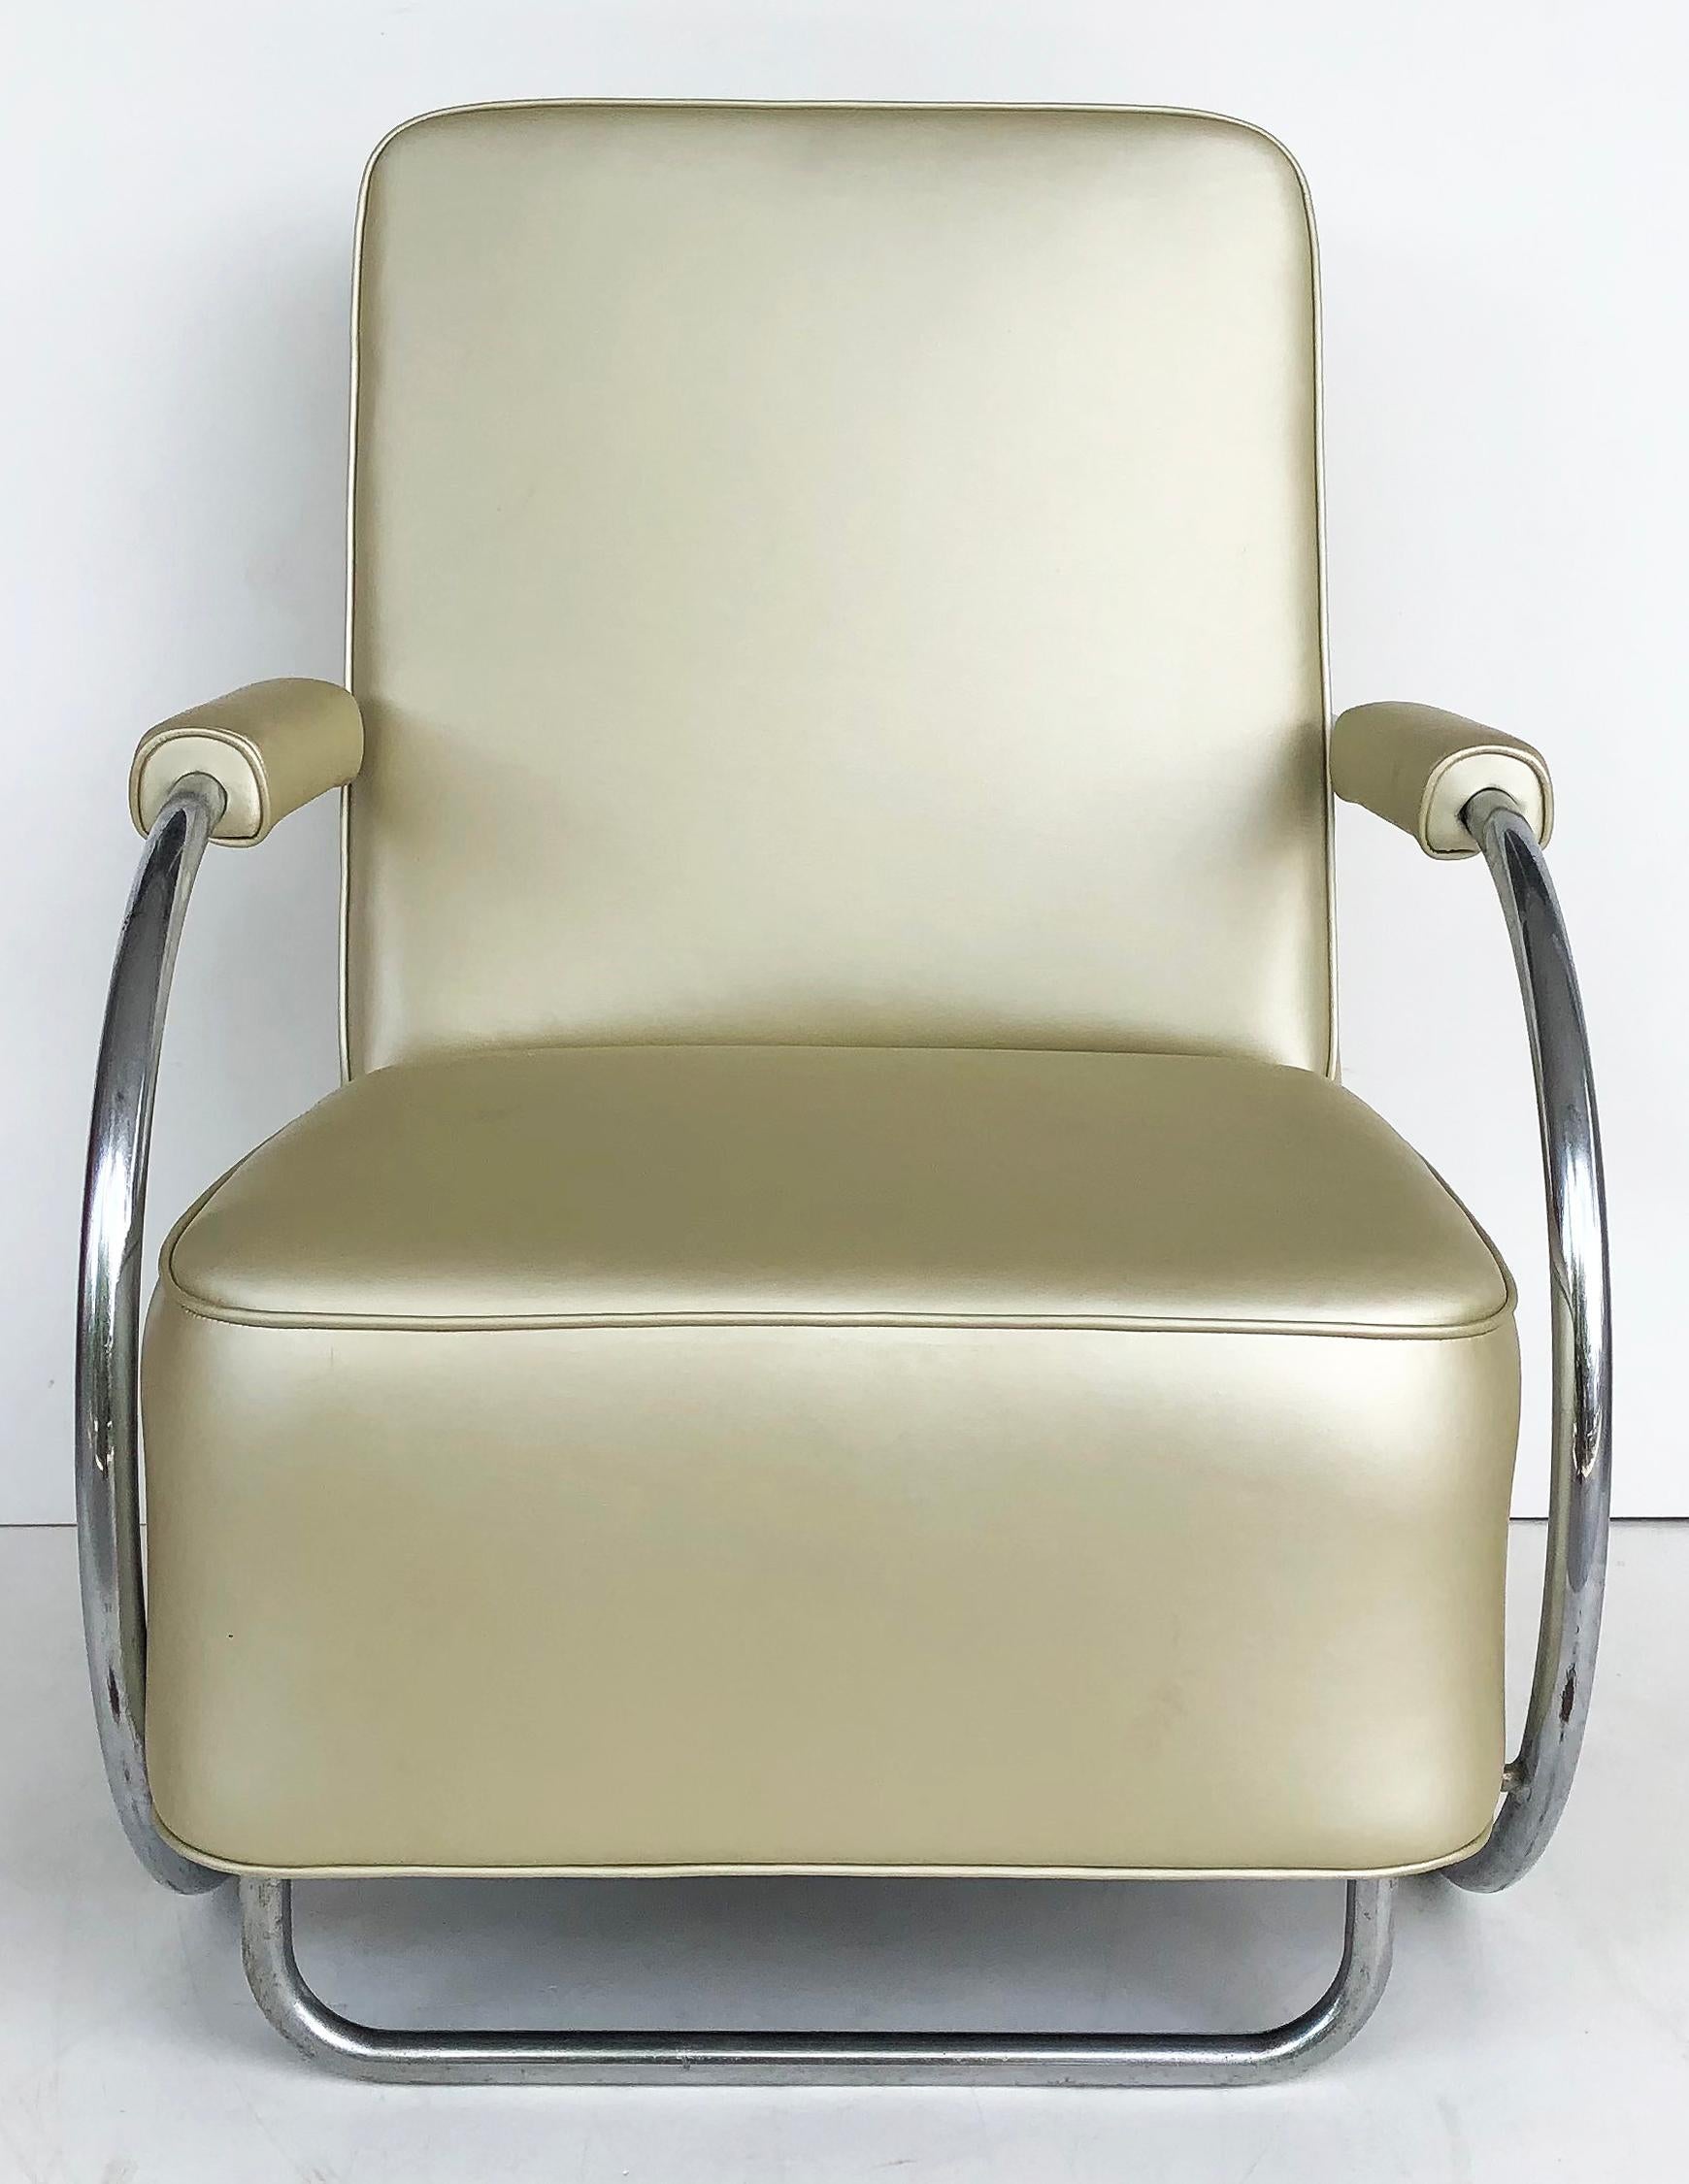 Art Deco Streamlined Moderne chairs by Kem Weber, Attributed 

Offered for sale is a pair of Kem Weber attributed Art Deco Streamline Moderne chairs. The pair are reclining tubular chrome chairs and appear to possibly retain the original period